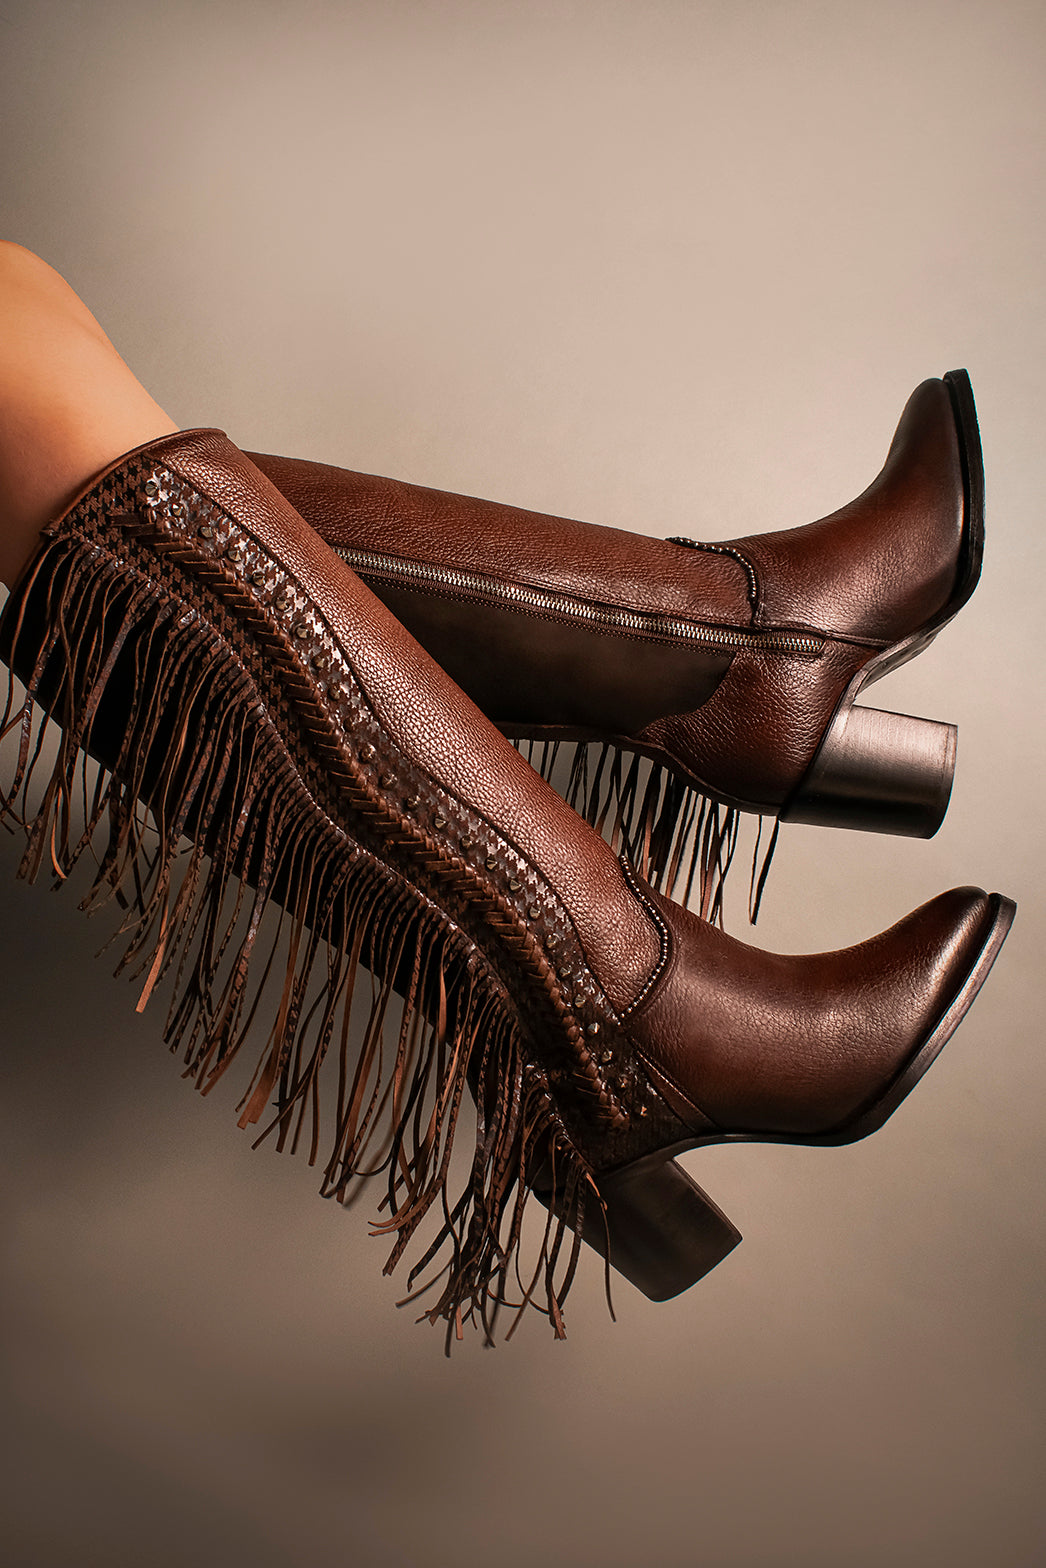 Handwoven brown leather boot, for women - 3F69RS - Cuadra Shop